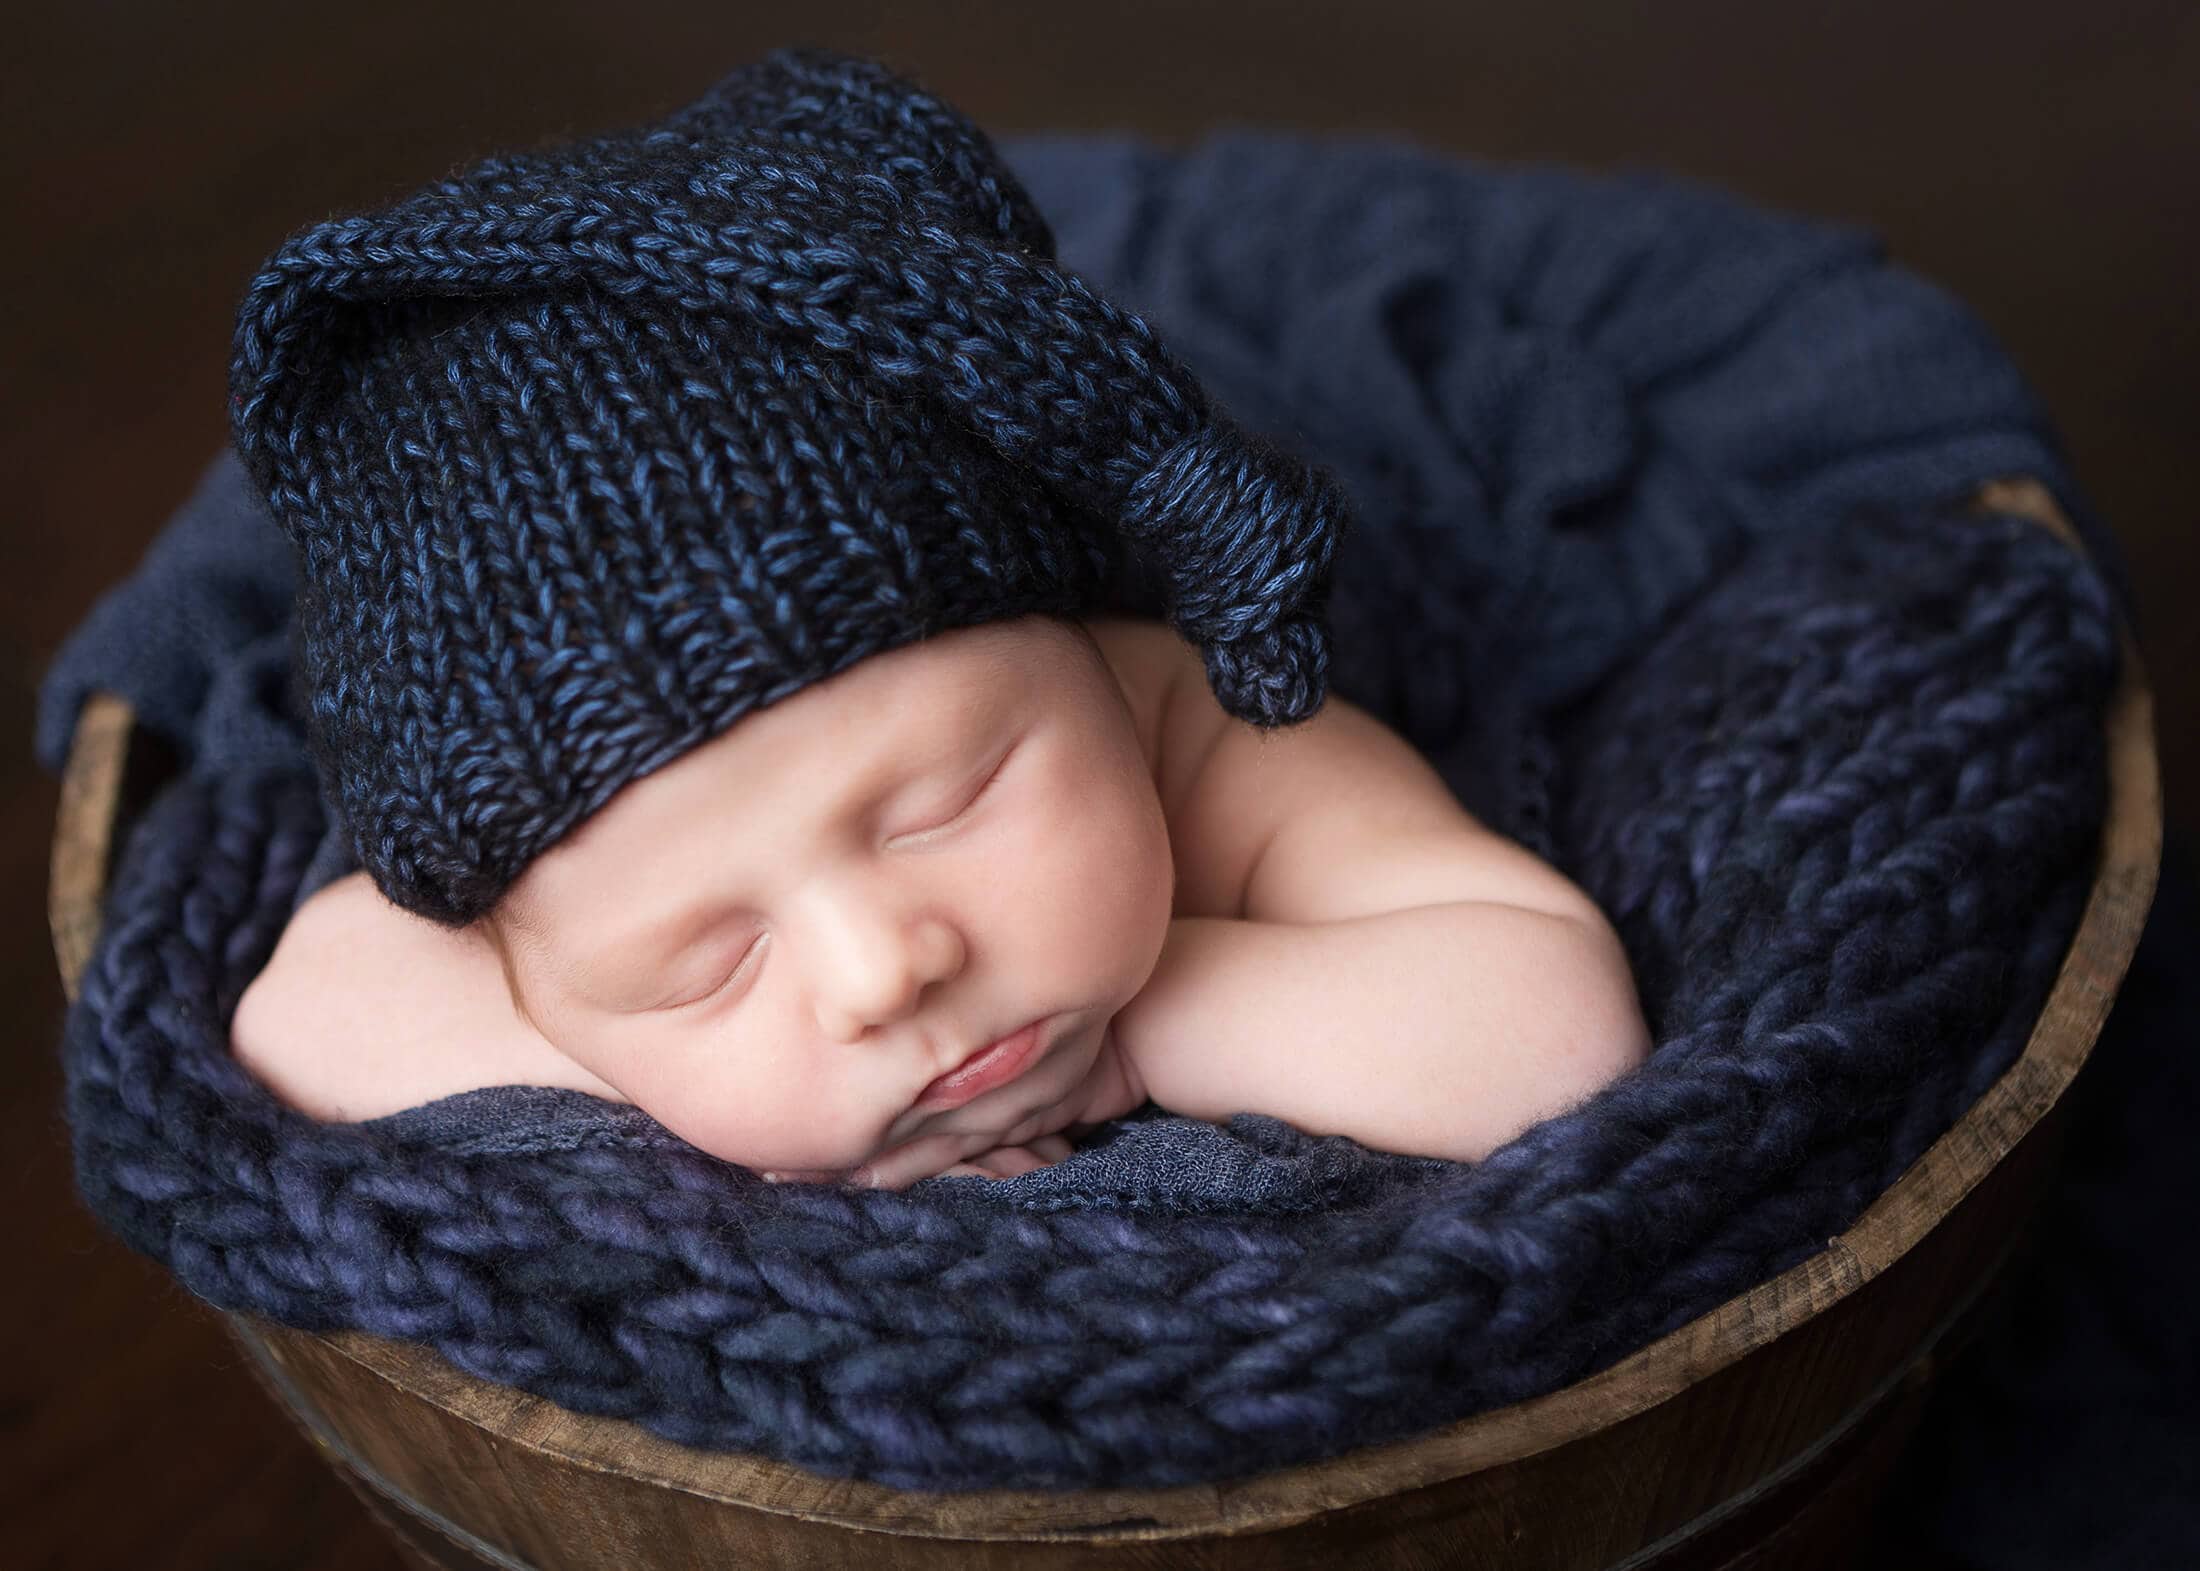 A newborn sleeping in a blue knitted hat in a wooden bowl.